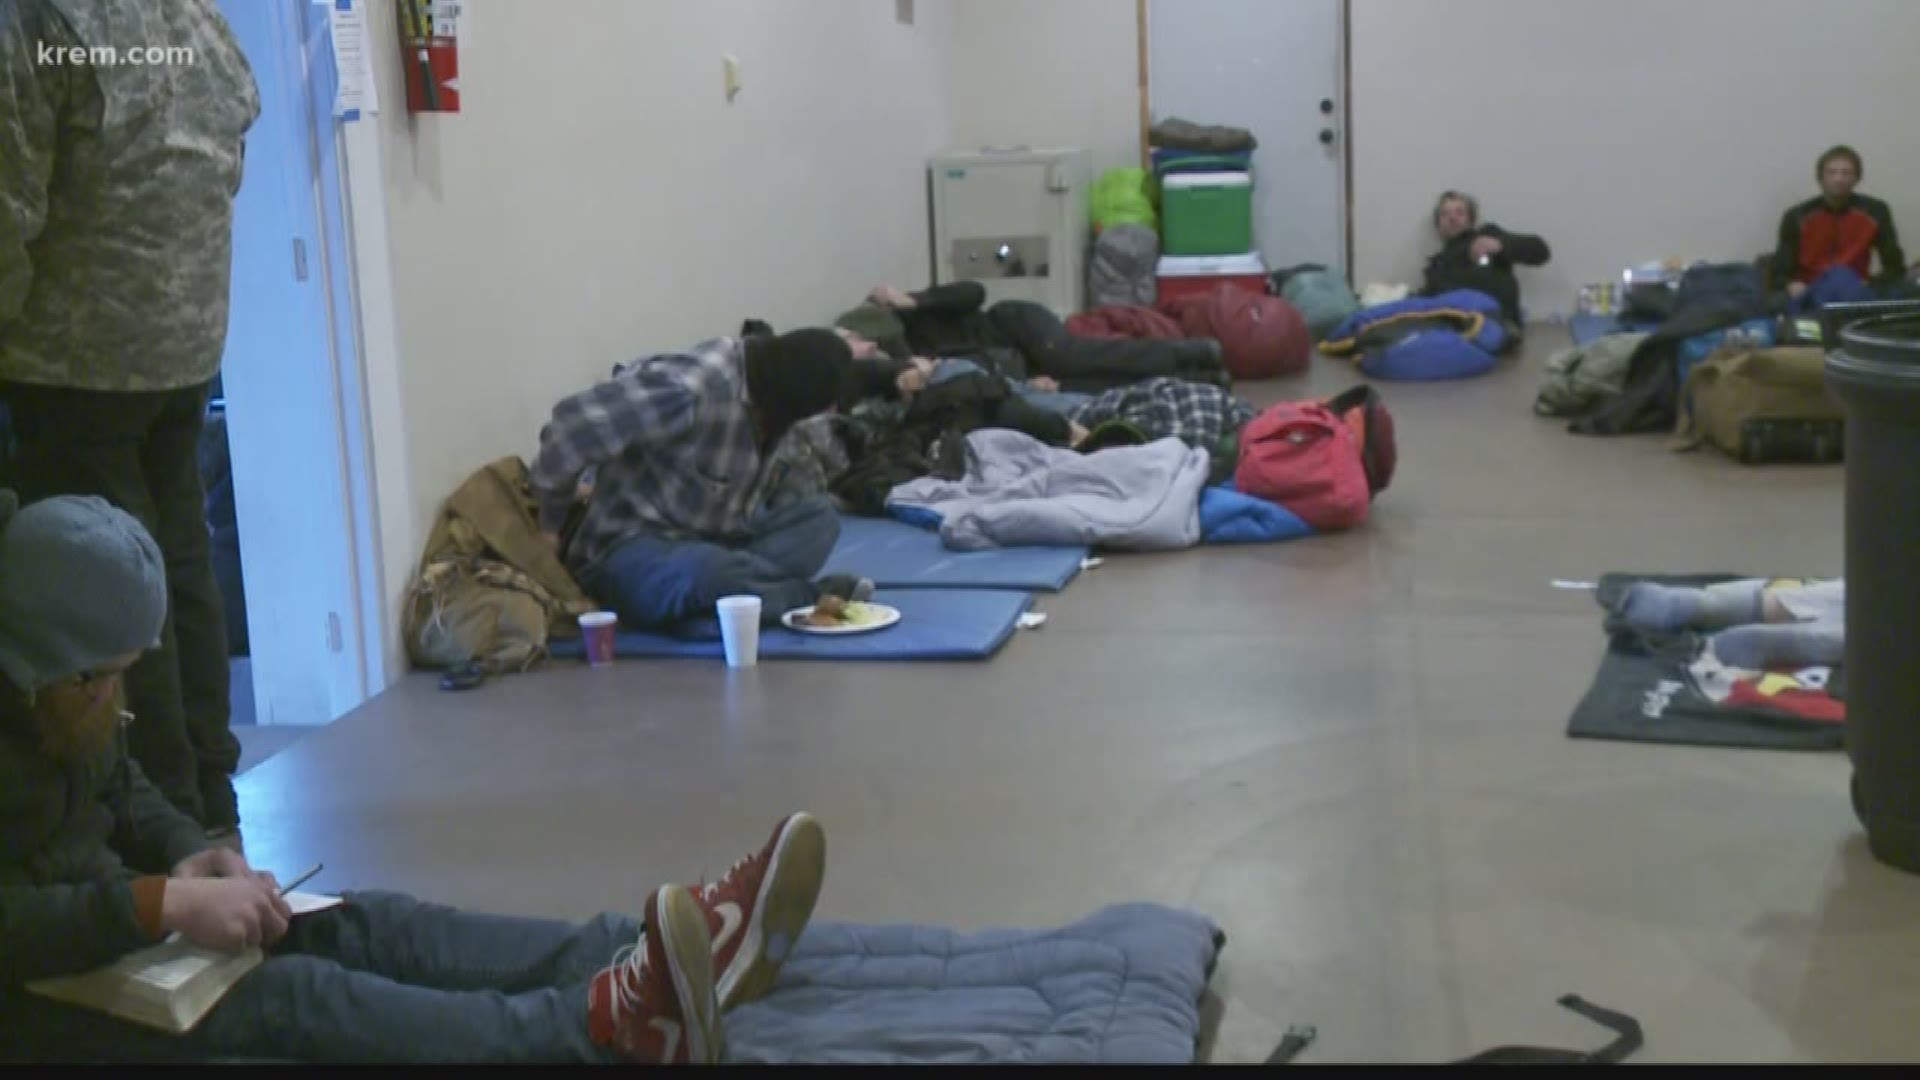 The $2 million will pay for six different projects to help people experiencing homelessness.